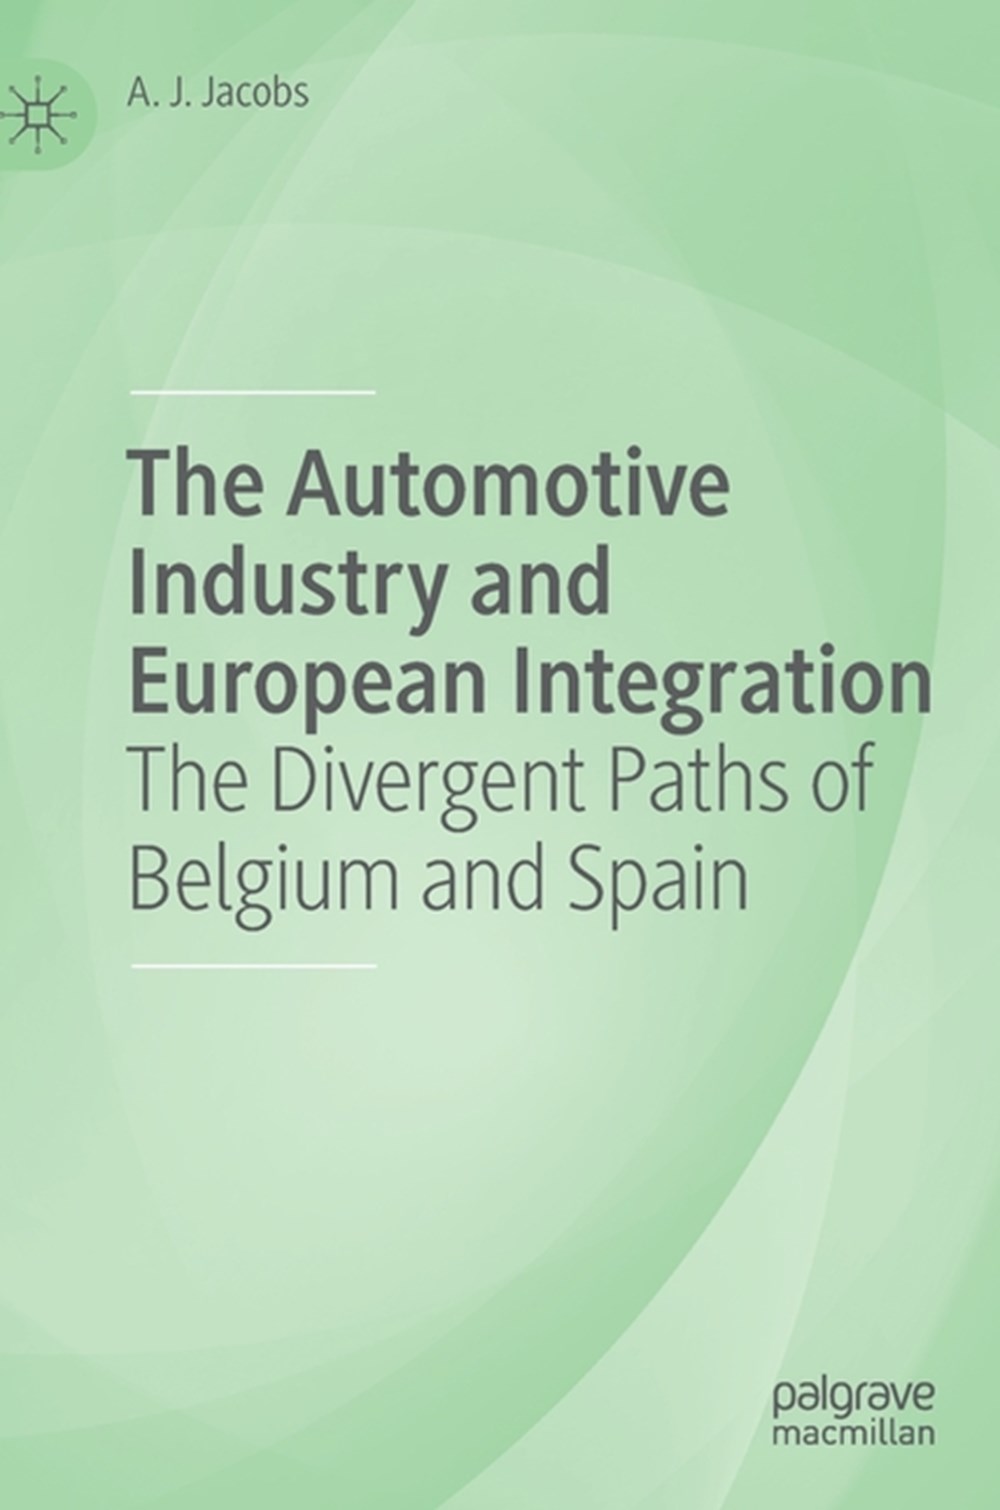 Automotive Industry and European Integration: The Divergent Paths of Belgium and Spain (2019)